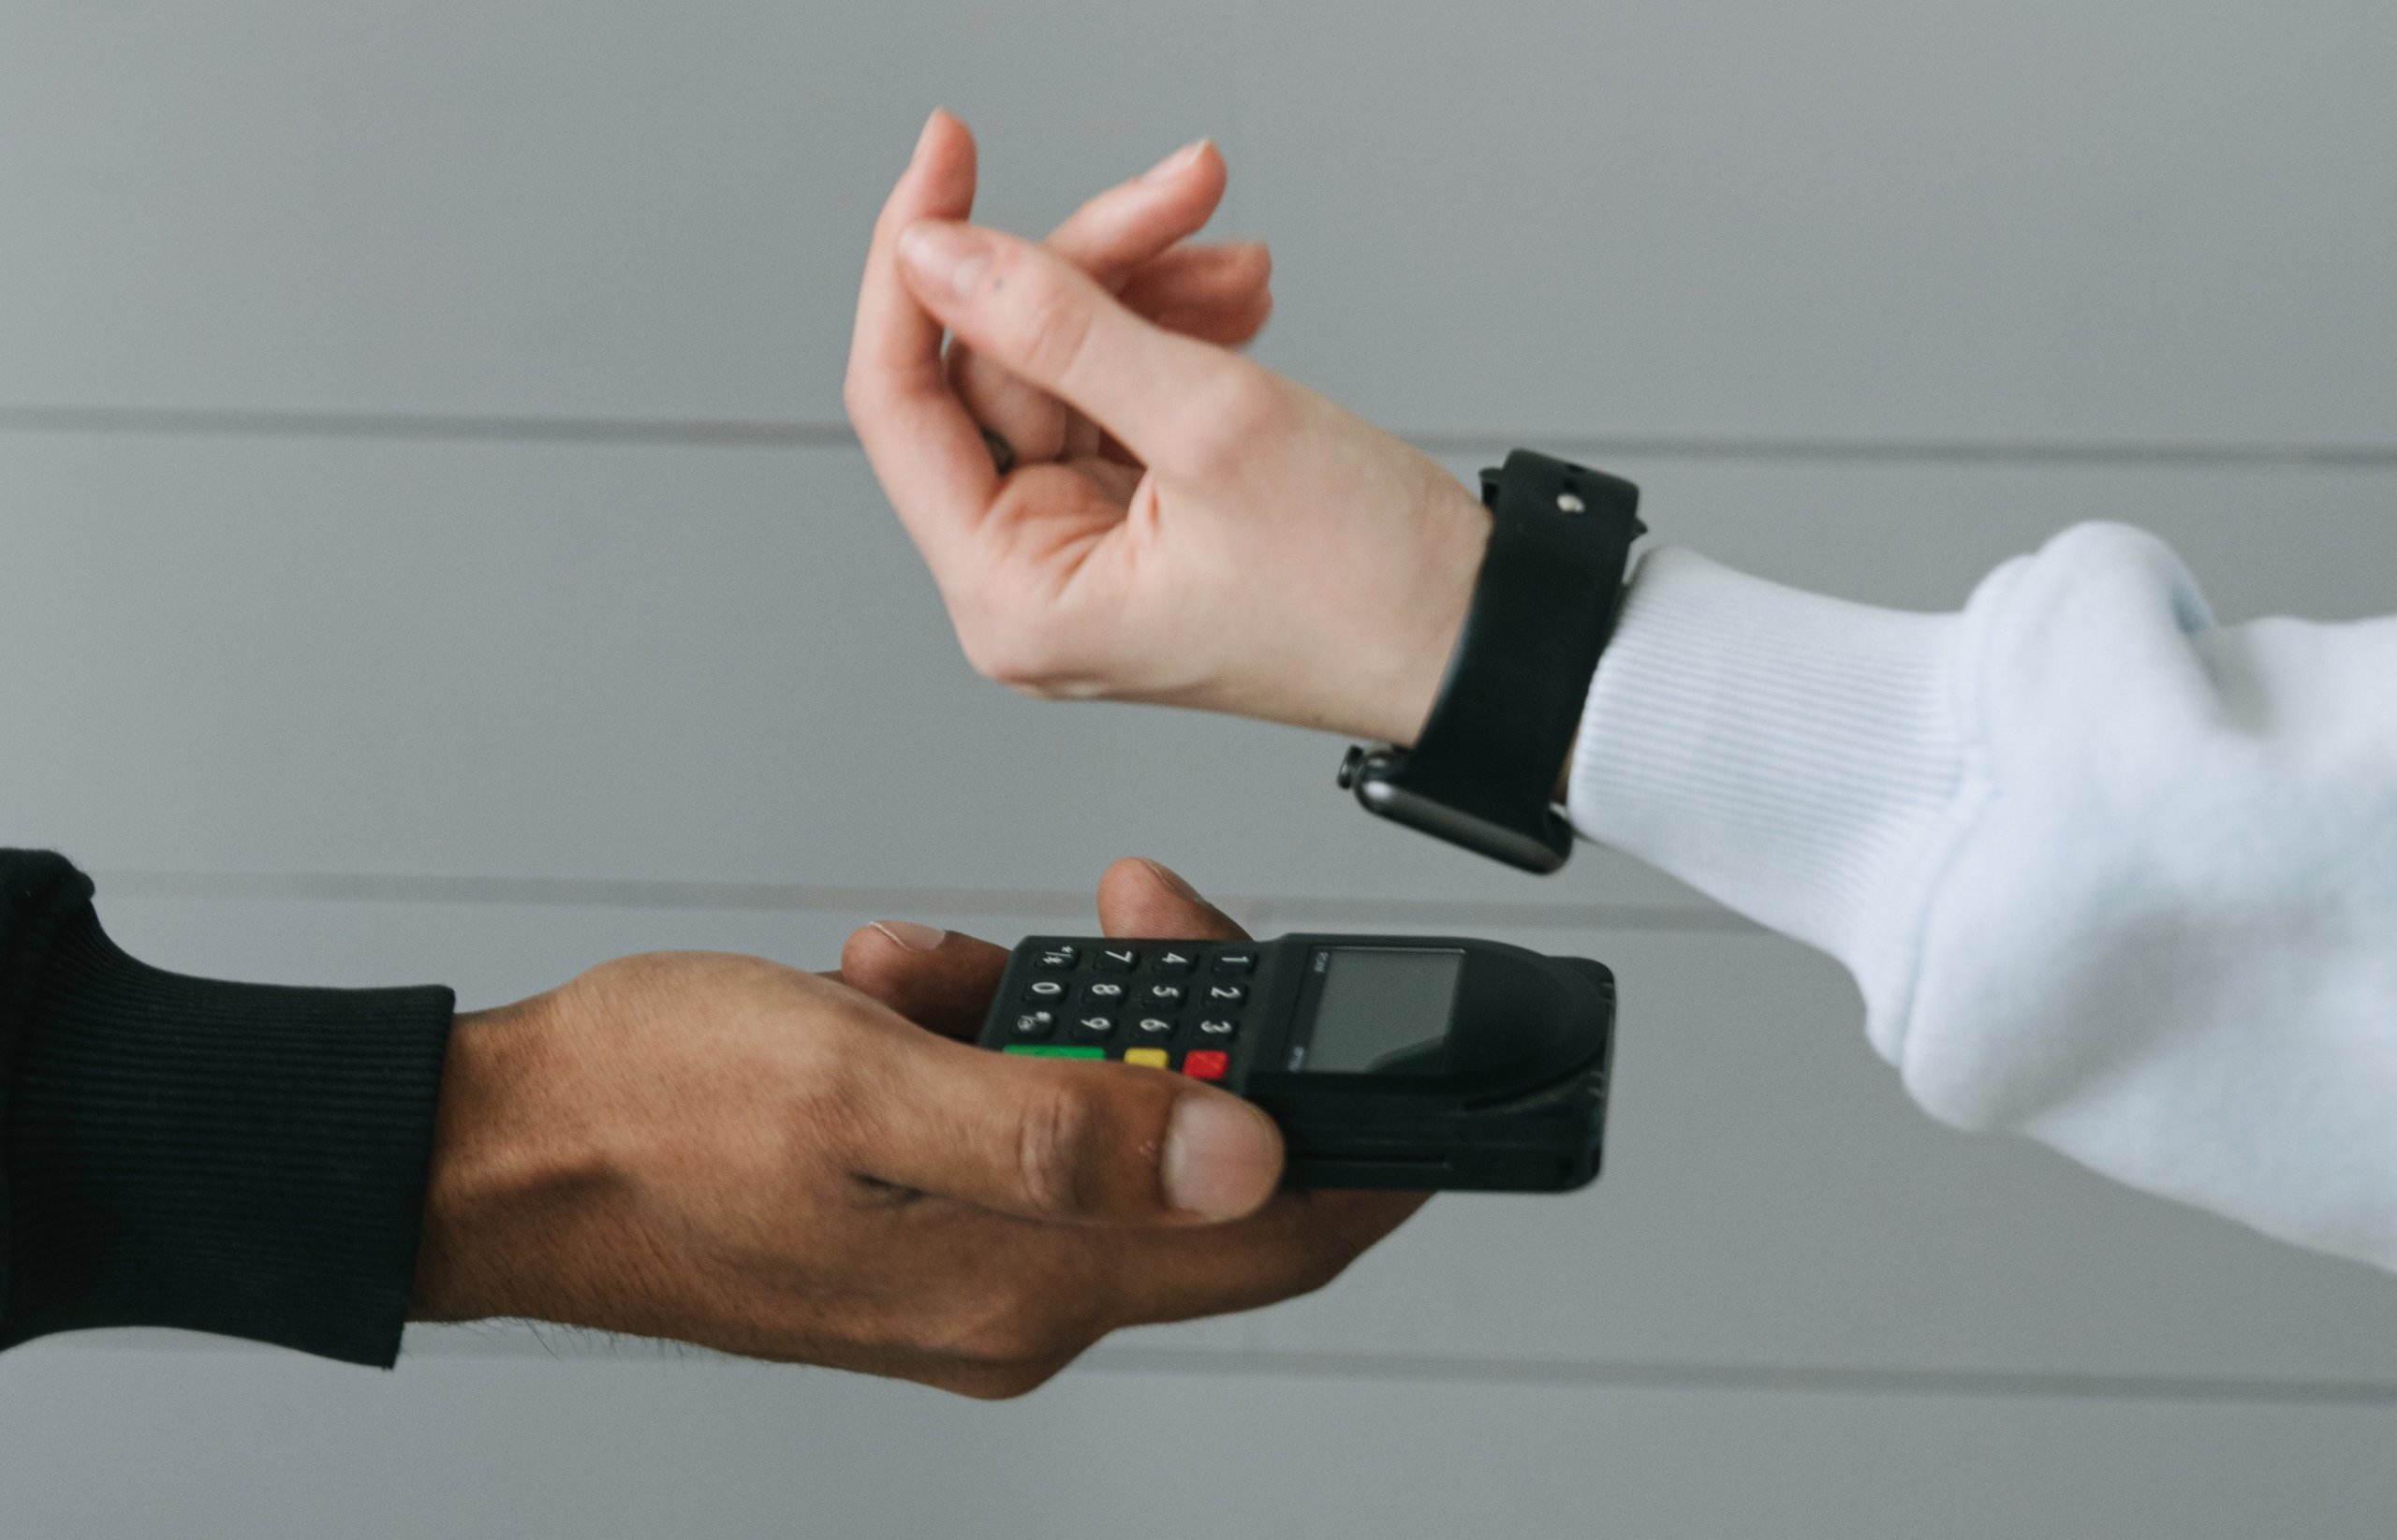 Using a watch to pay for transaction as an example of open finance in practice